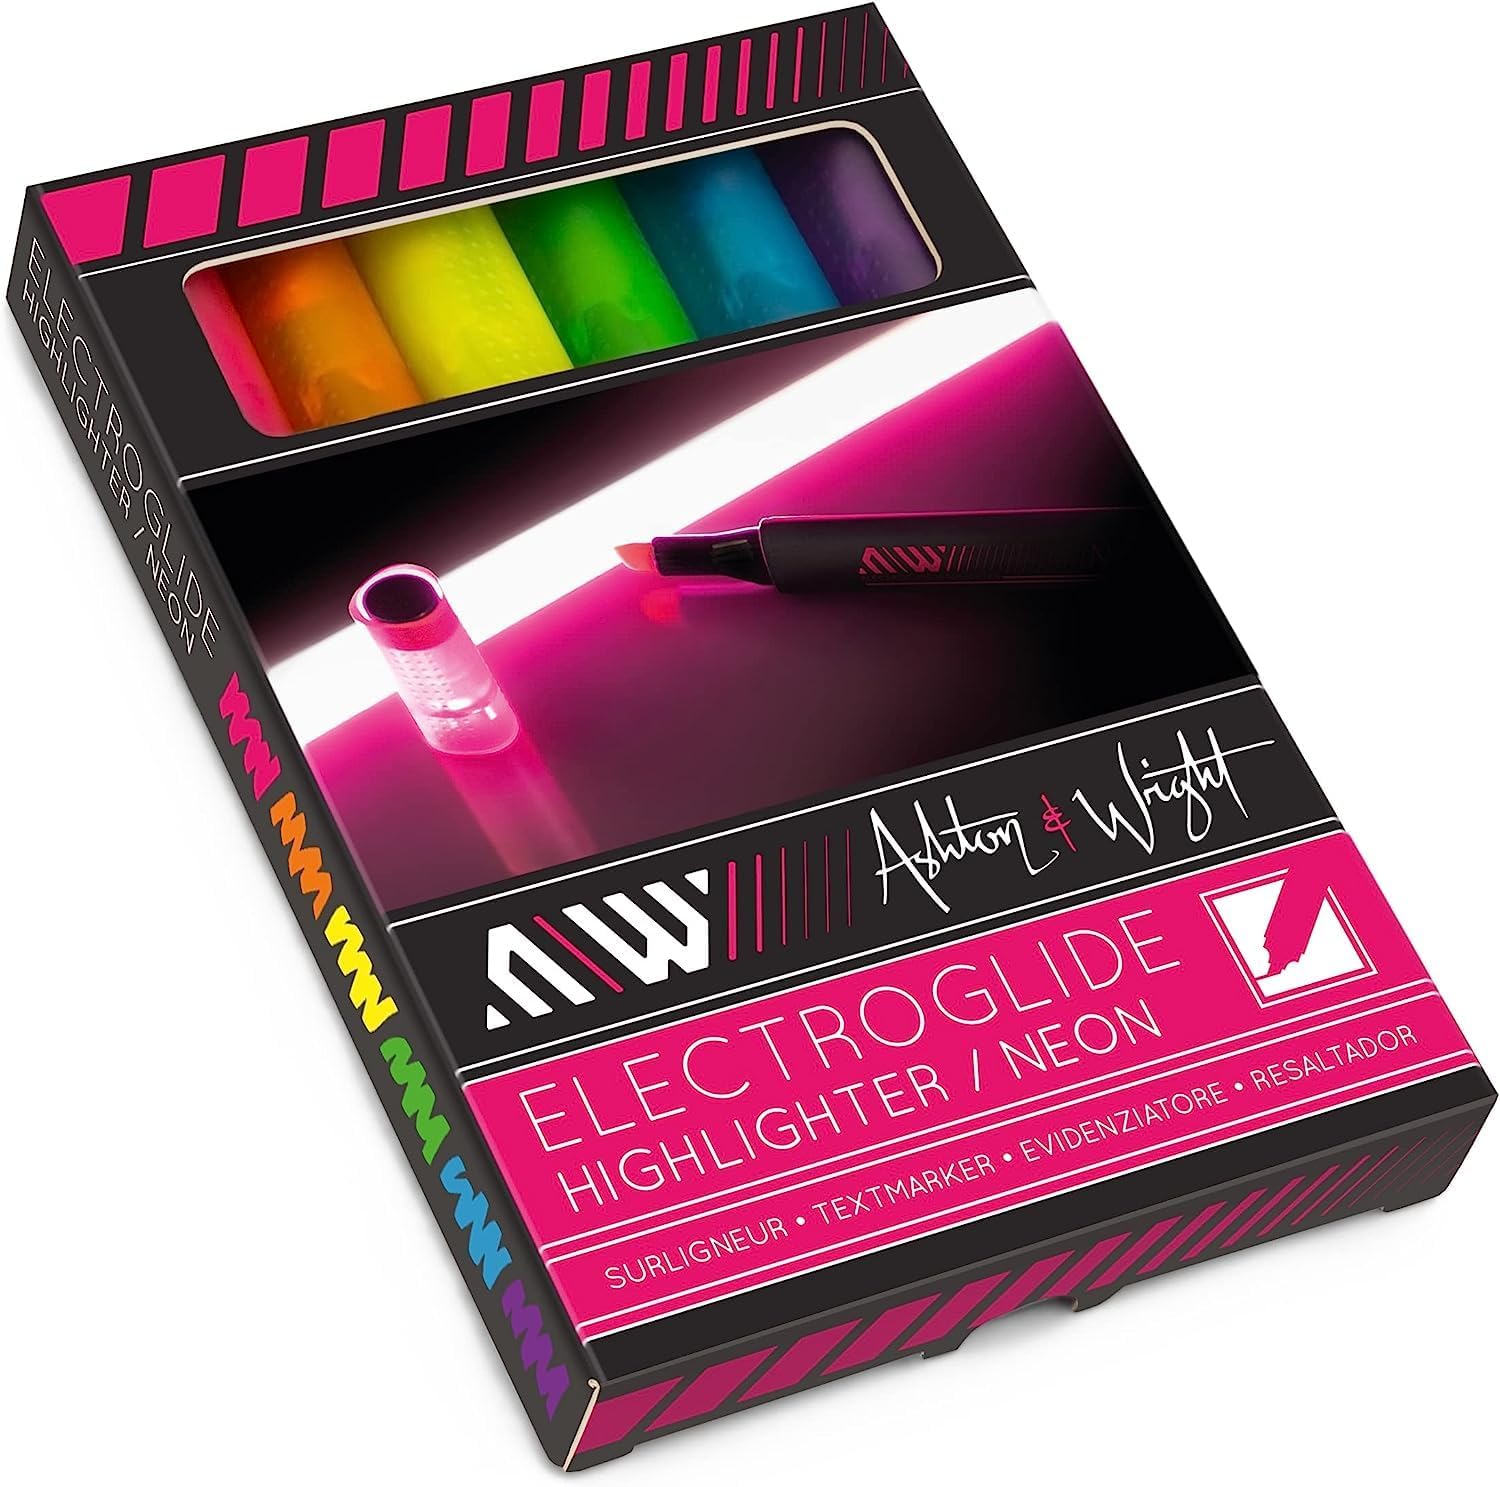 ElectroGlide Triangular Pastel Highlighter Markers - Pack of 6 Pens